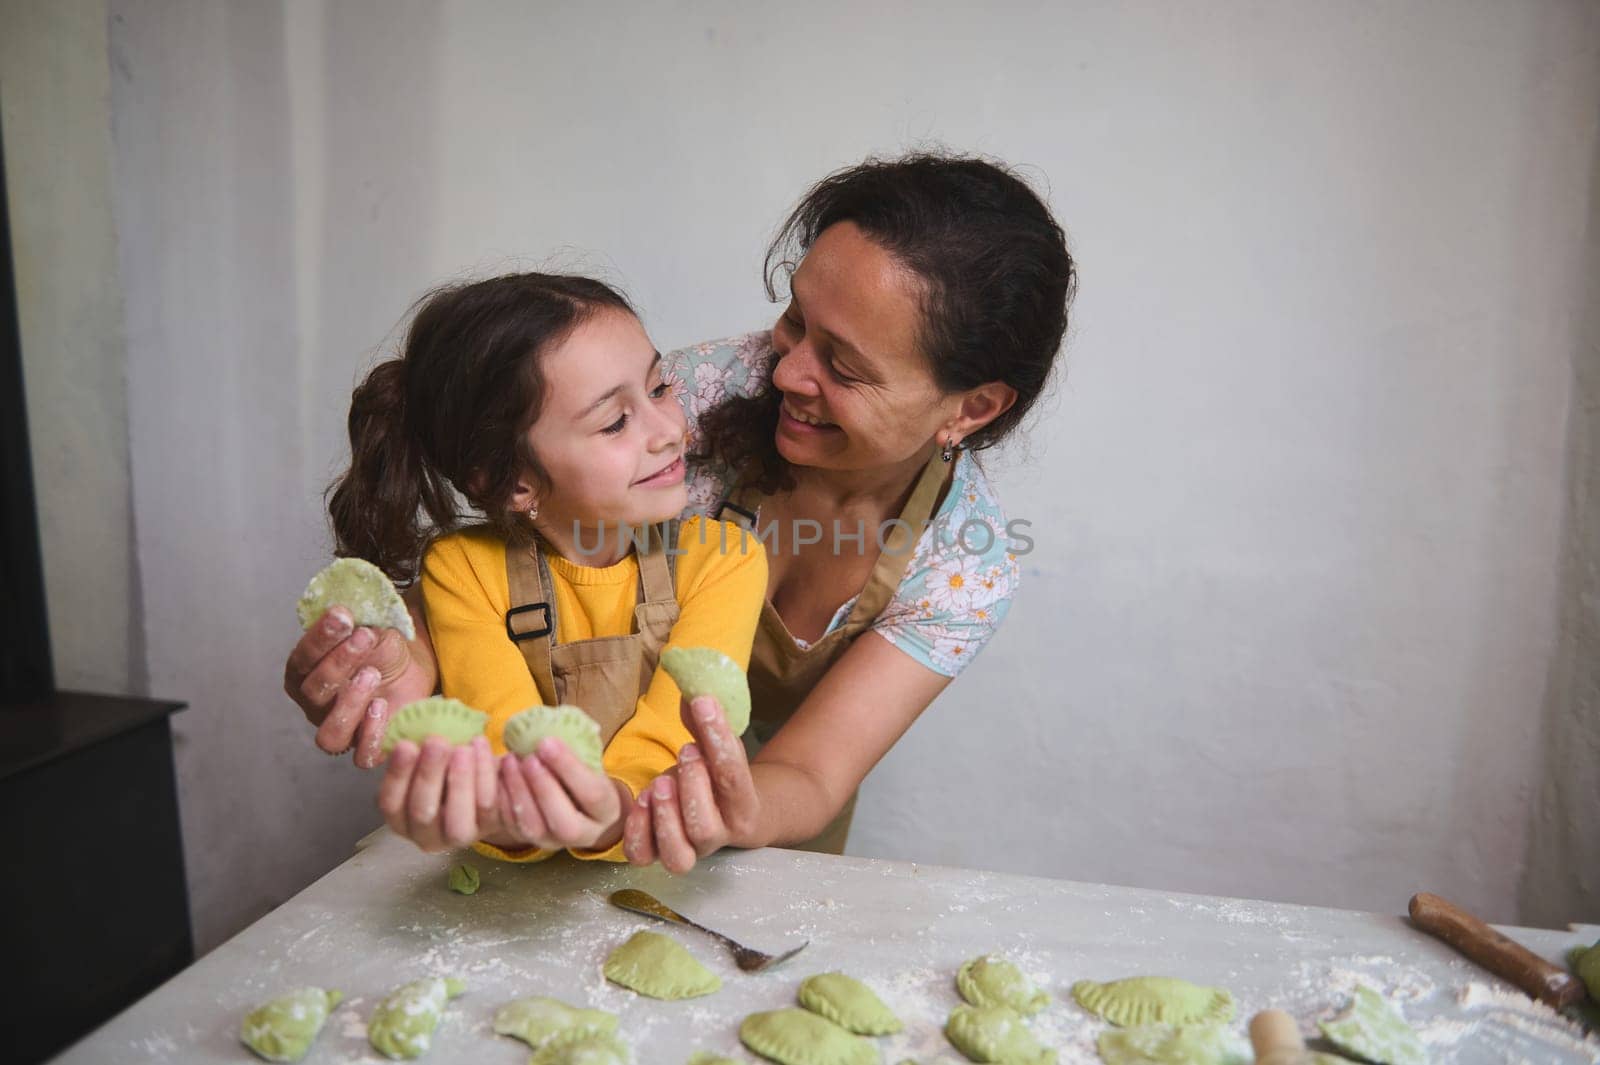 Smiling mother and daughter looking at each other, holding sculpted homemade dumplings or Ukrainian varenyky, standing together at floured kitchen table, against white wall background by artgf